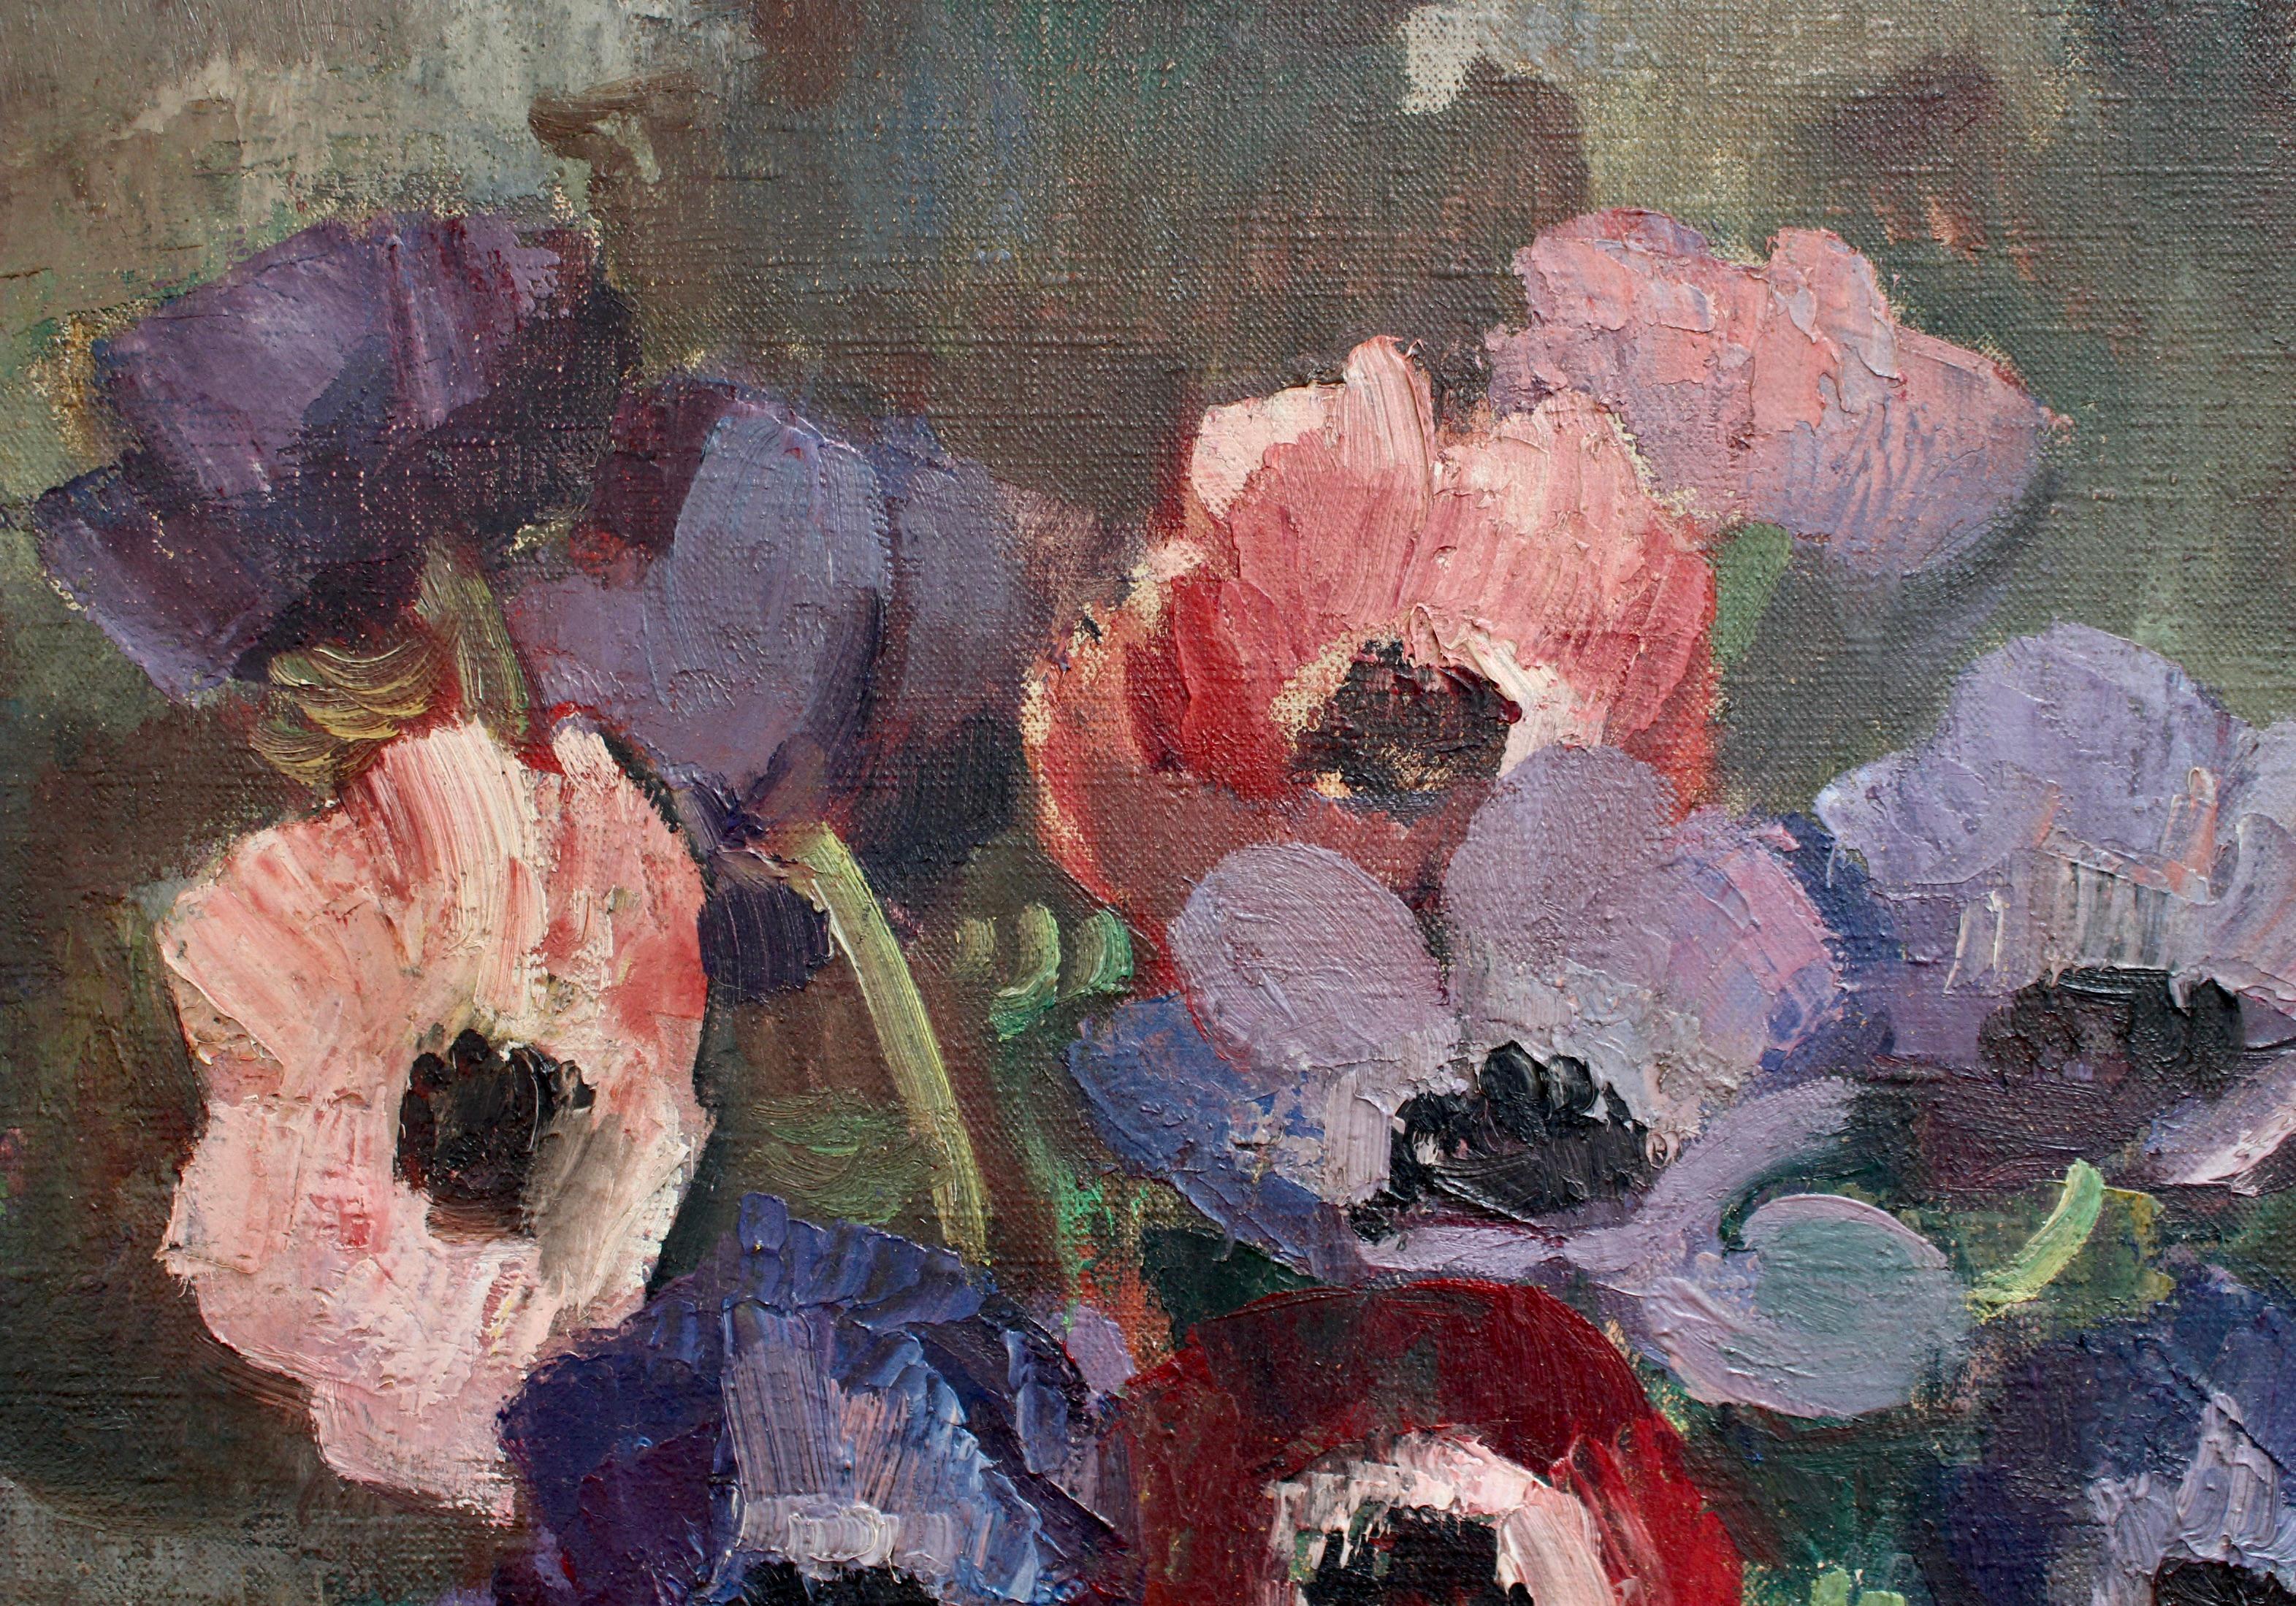 'Still Life with Anemones in Pitcher', oil on canvas, French School (circa 1930s). A very exceptional still life demonstrating masterful technique by the artist who has a delicate, sensitive touch and keen eye. The subdued light falls on a portion